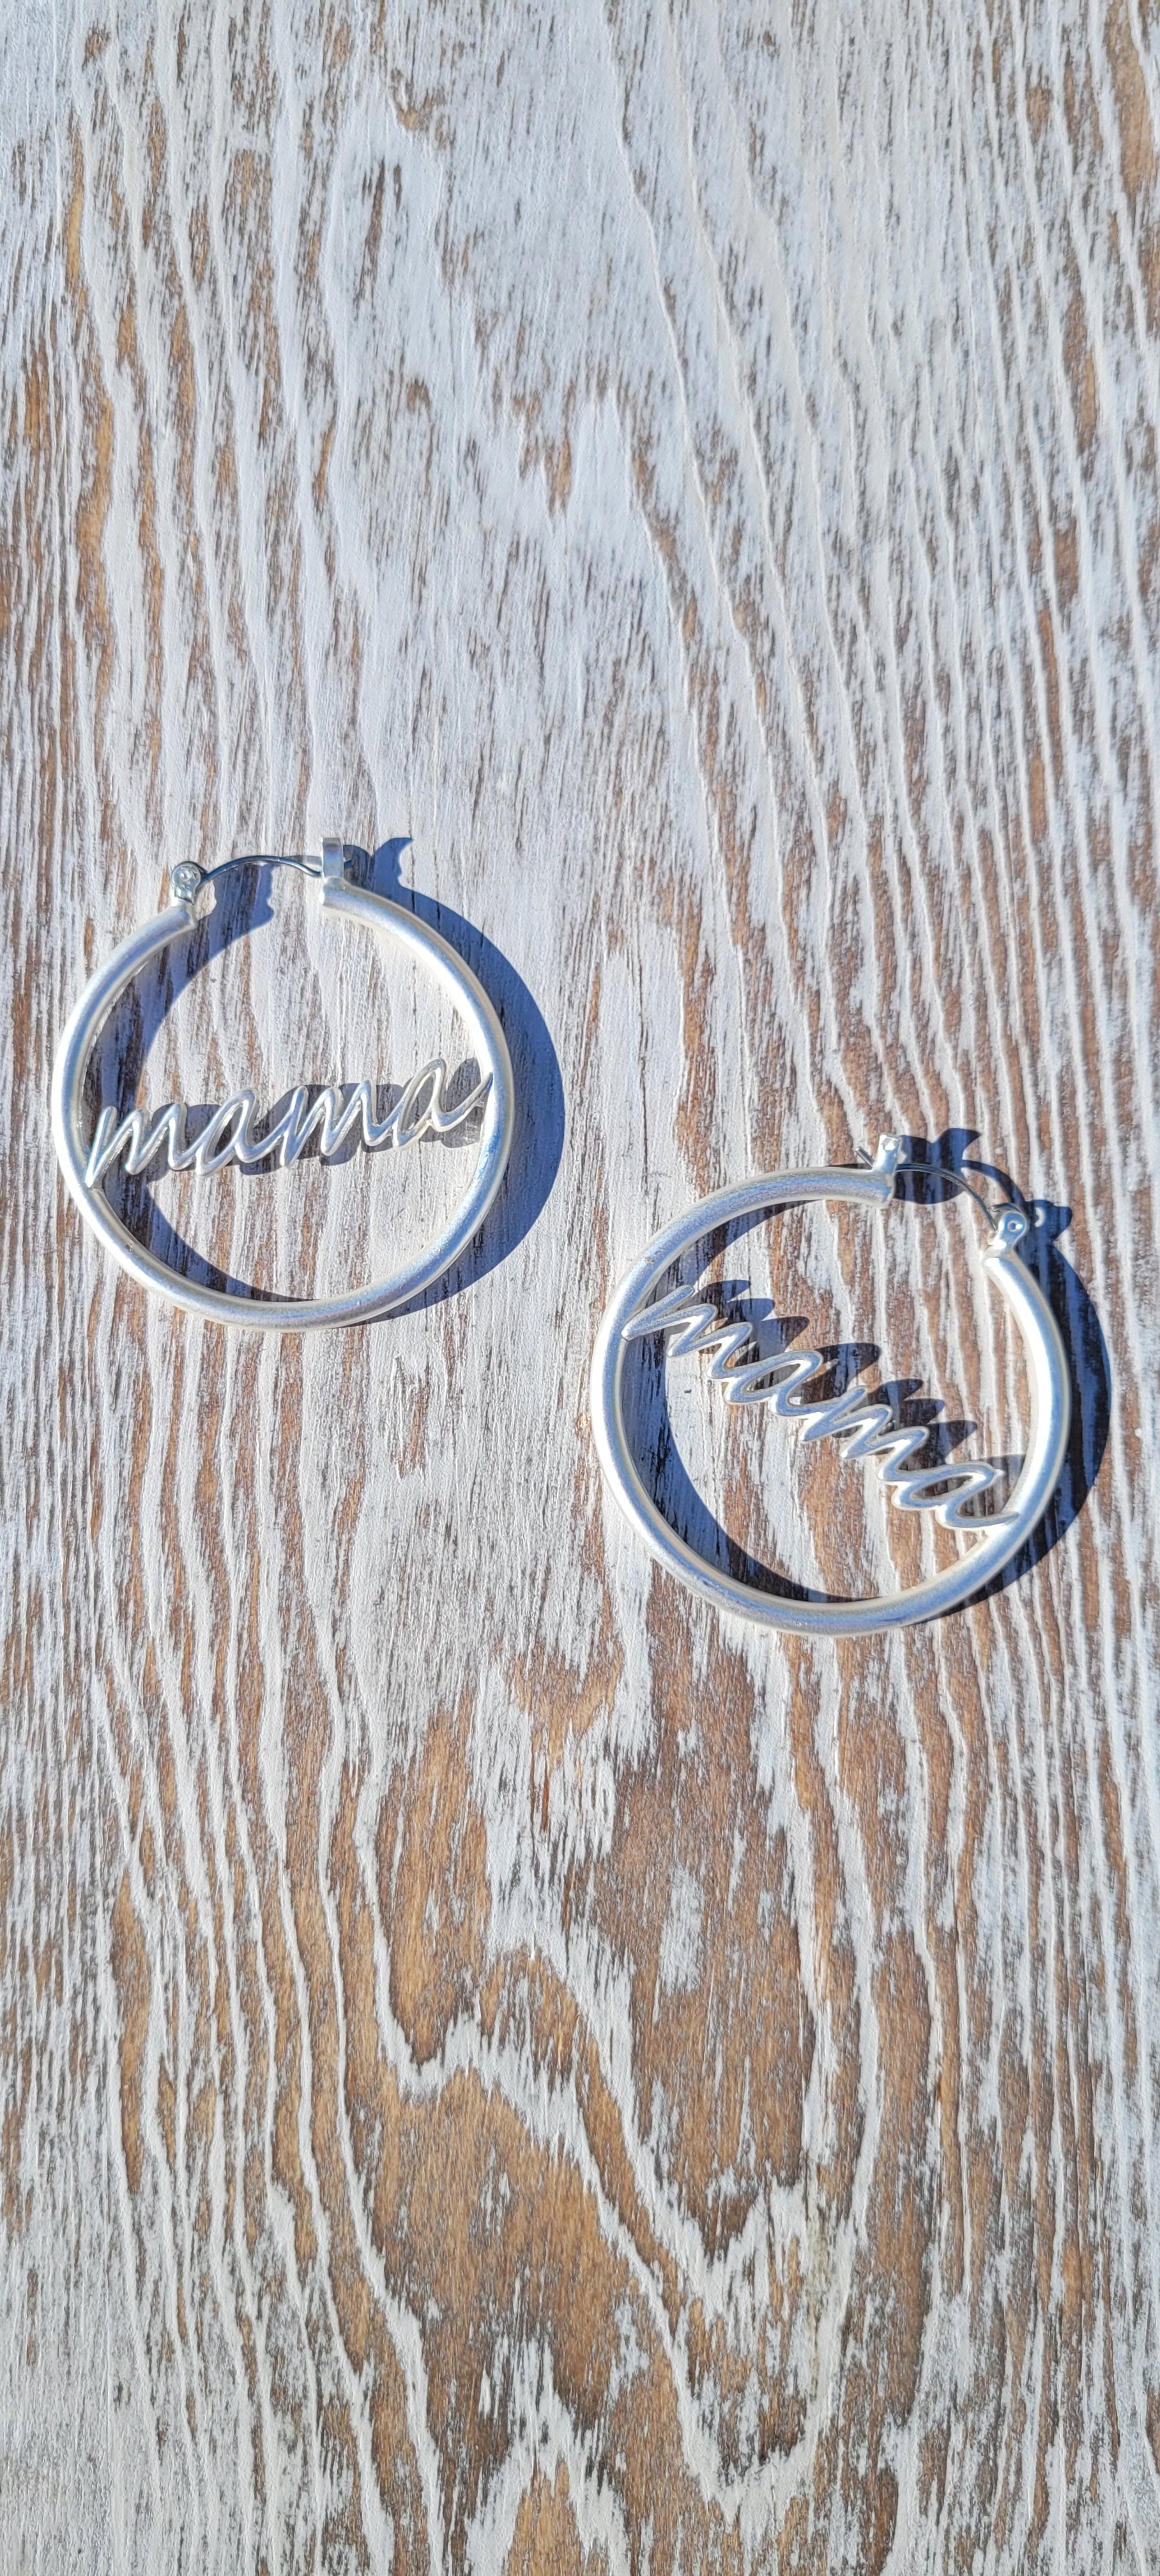 Silver hoops “Mama” wording Self locking earring back Diameter 1.625” Whether you want to be on the wild side or classy this earring set it will add a fun touch to your outfit